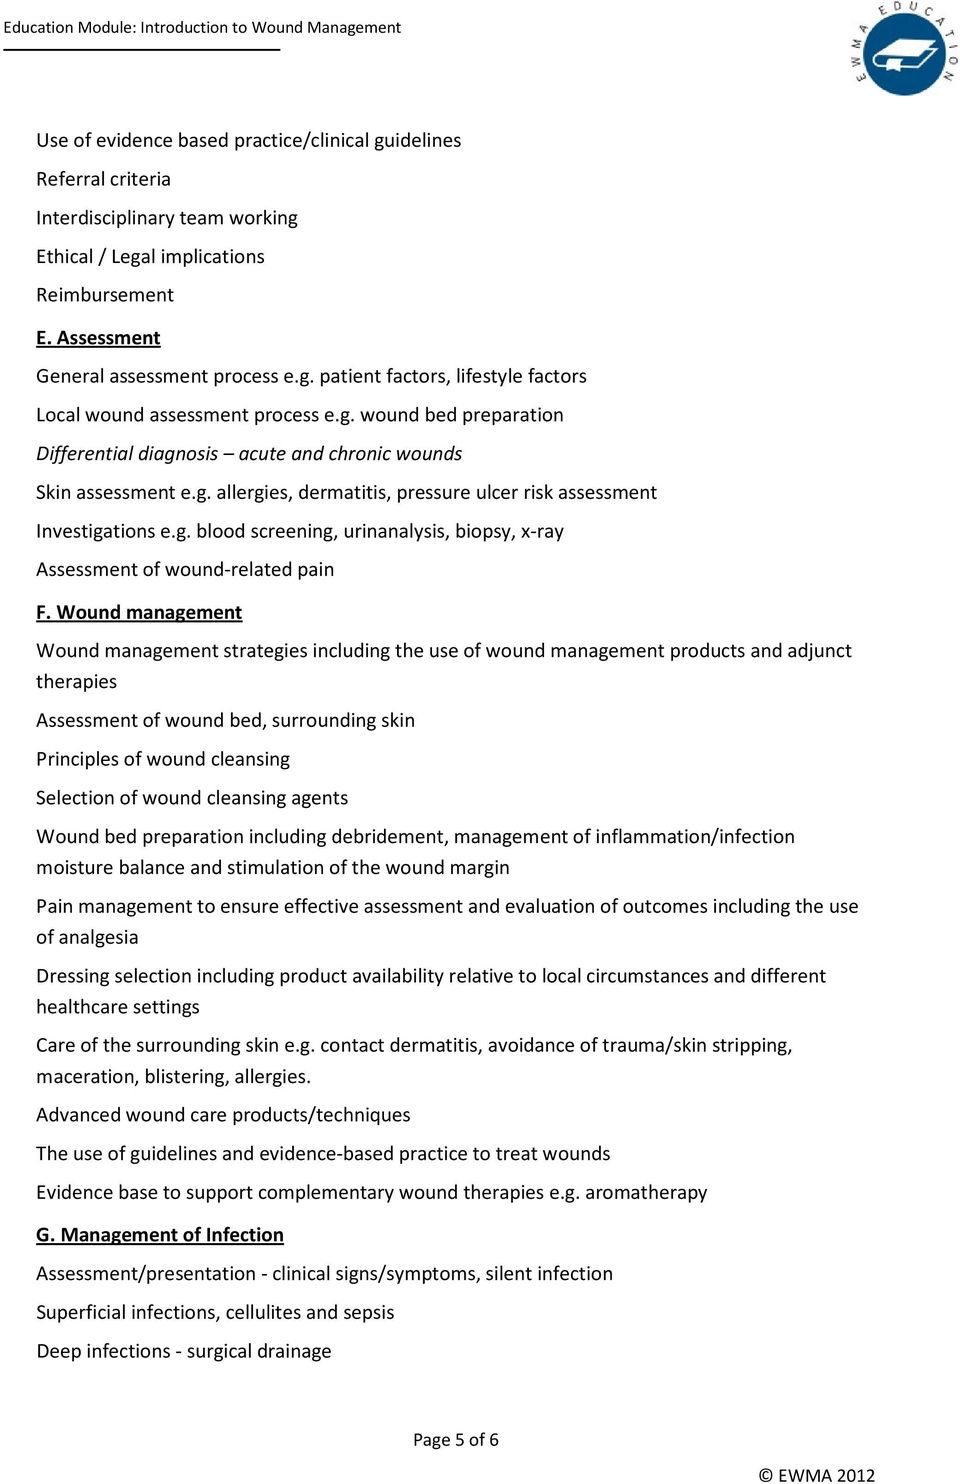 Wound management Wound management strategies including the use of wound management products and adjunct therapies Assessment of wound bed, surrounding skin Principles of wound cleansing Selection of